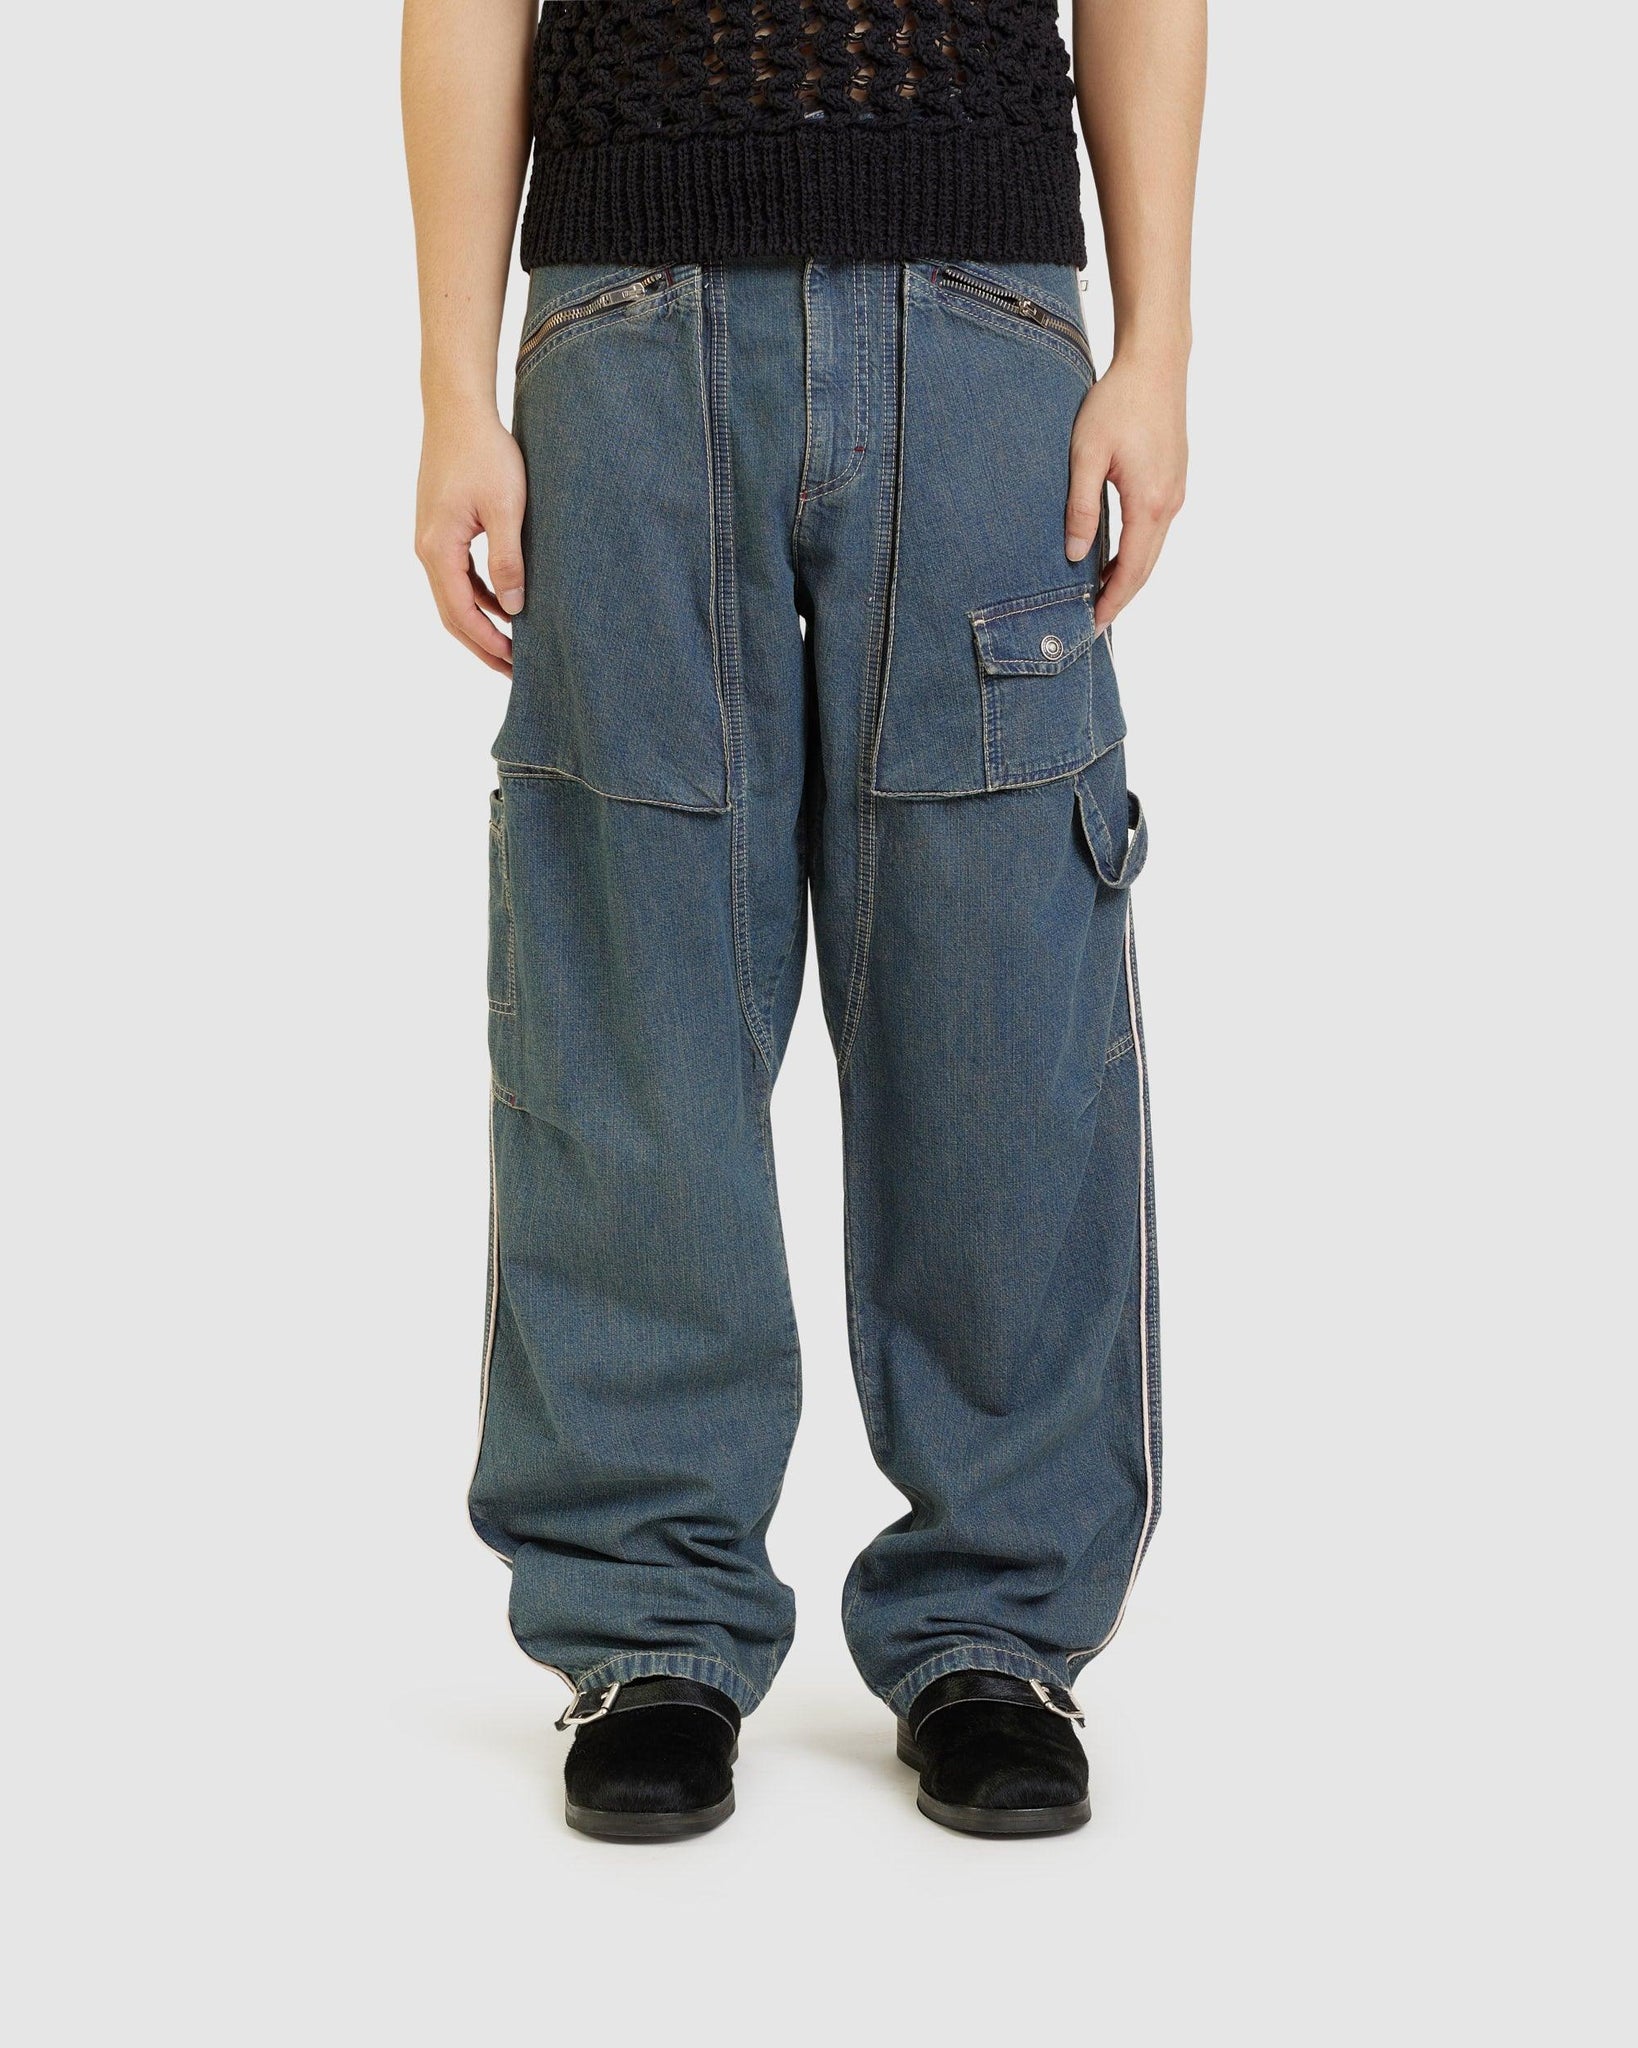 Parker Denim Pants - {{ collection.title }} - Chinatown Country Club 